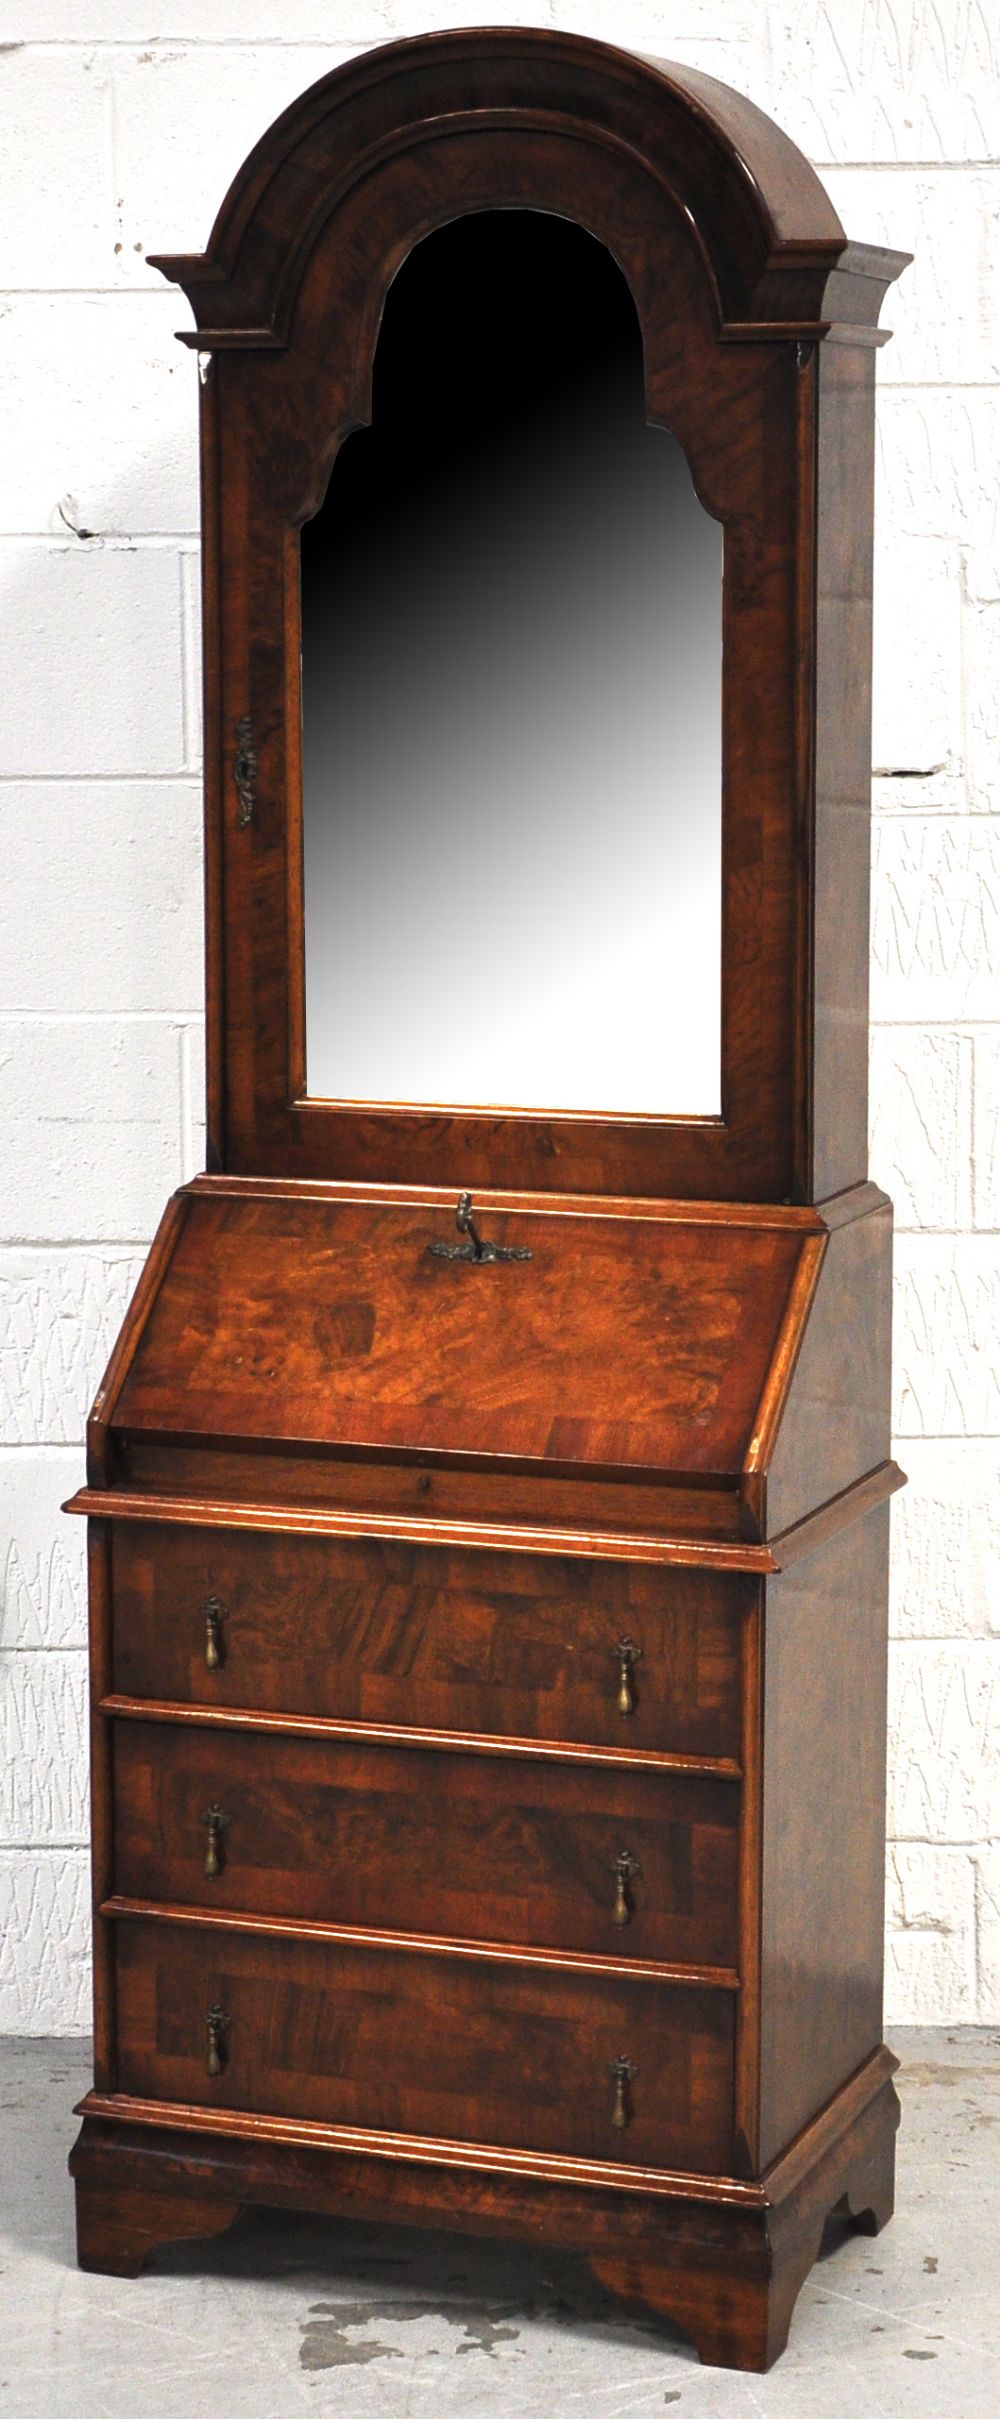 A reproduction walnut and crossbanded dome topped bureau bookcase of small proportions, the upper